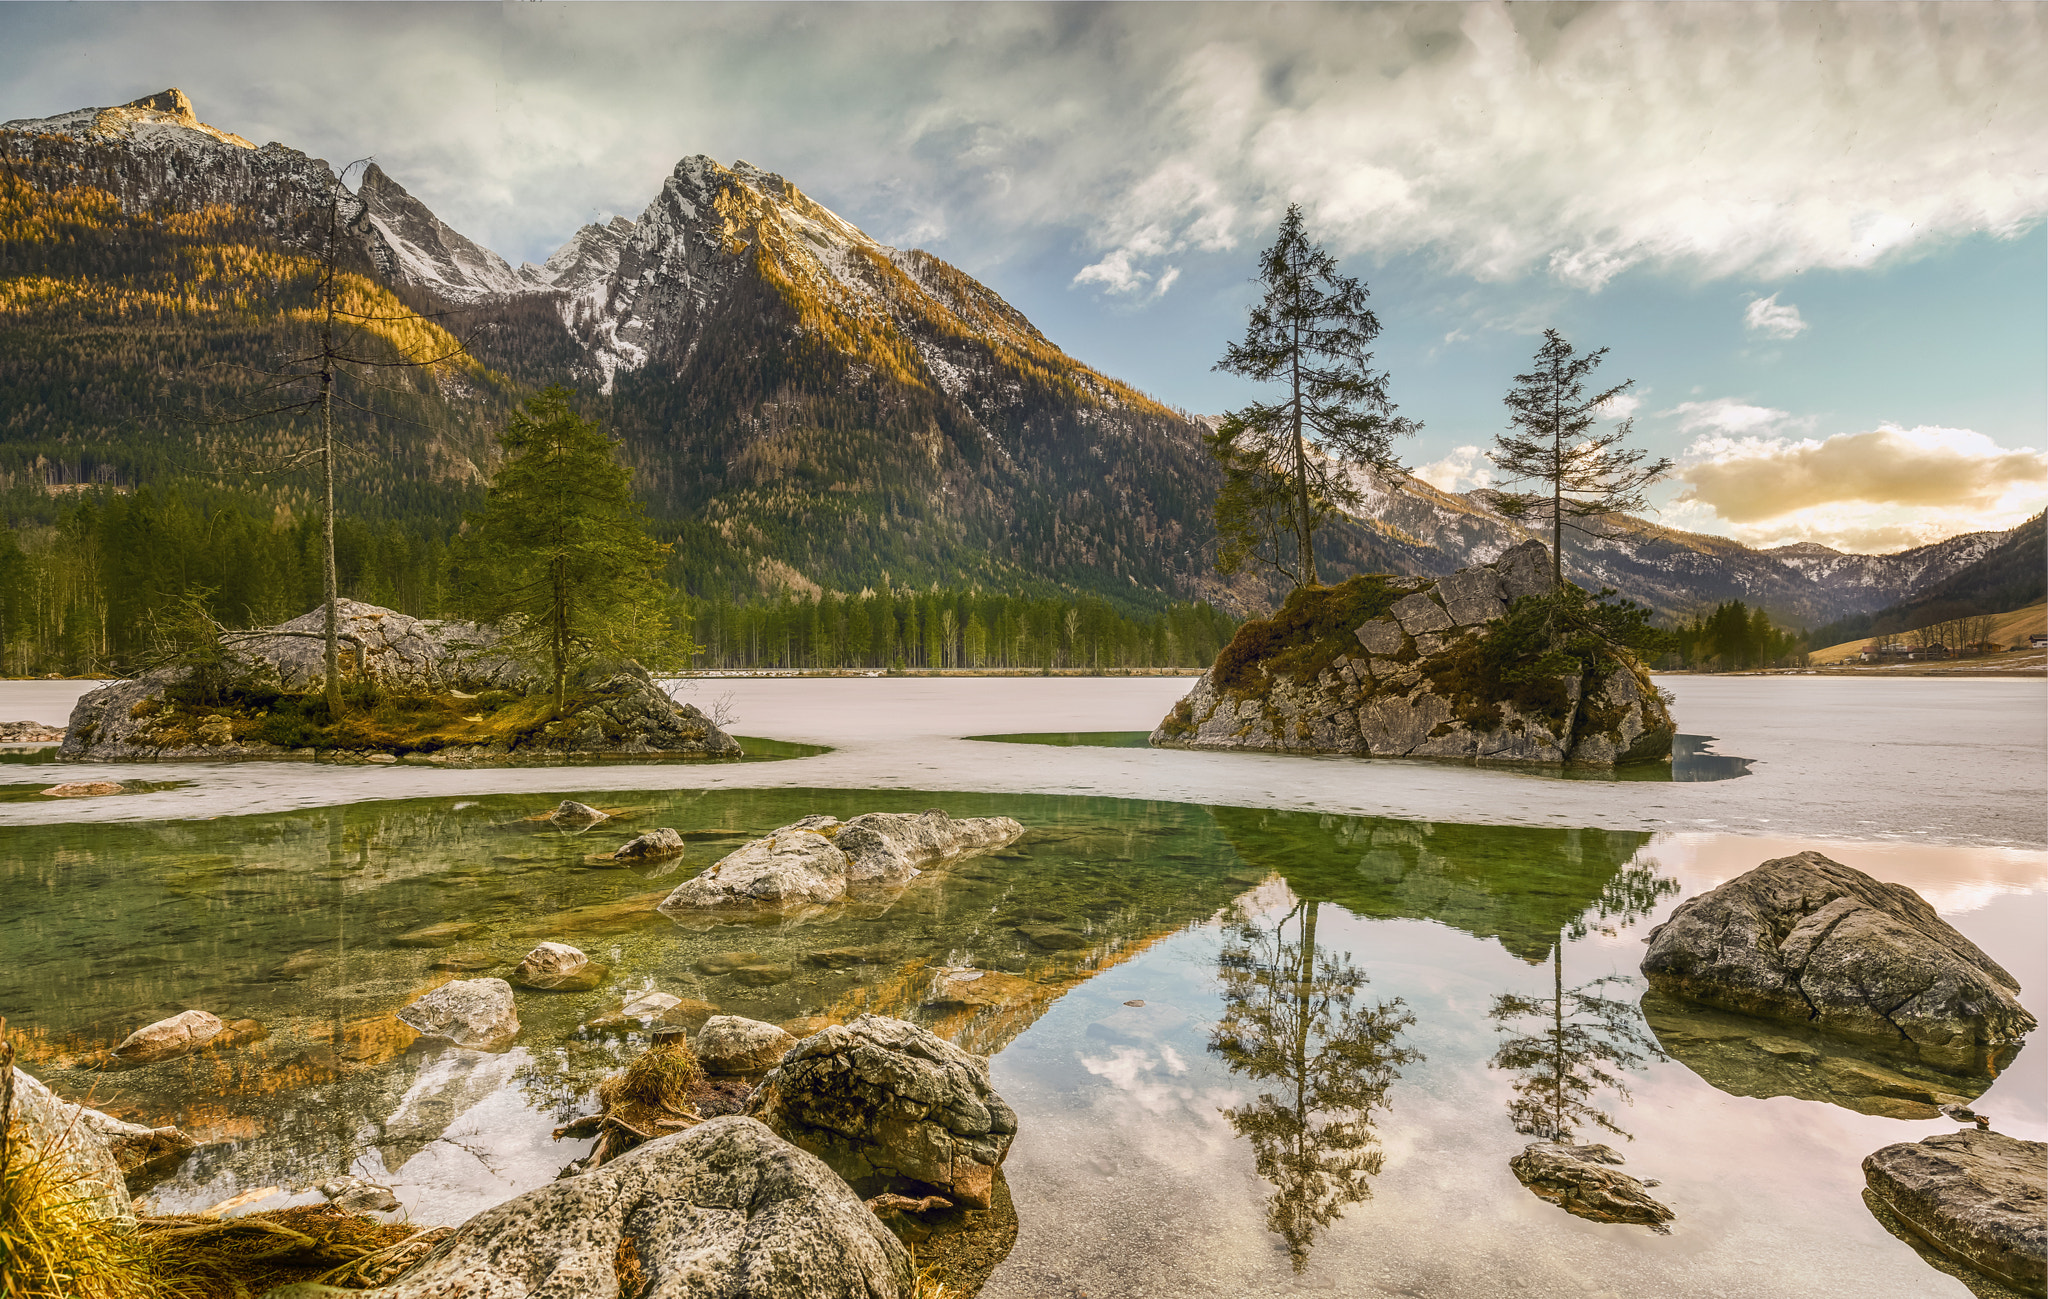 Sony a7R II sample photo. Classical image of a romantic mountain lake photography